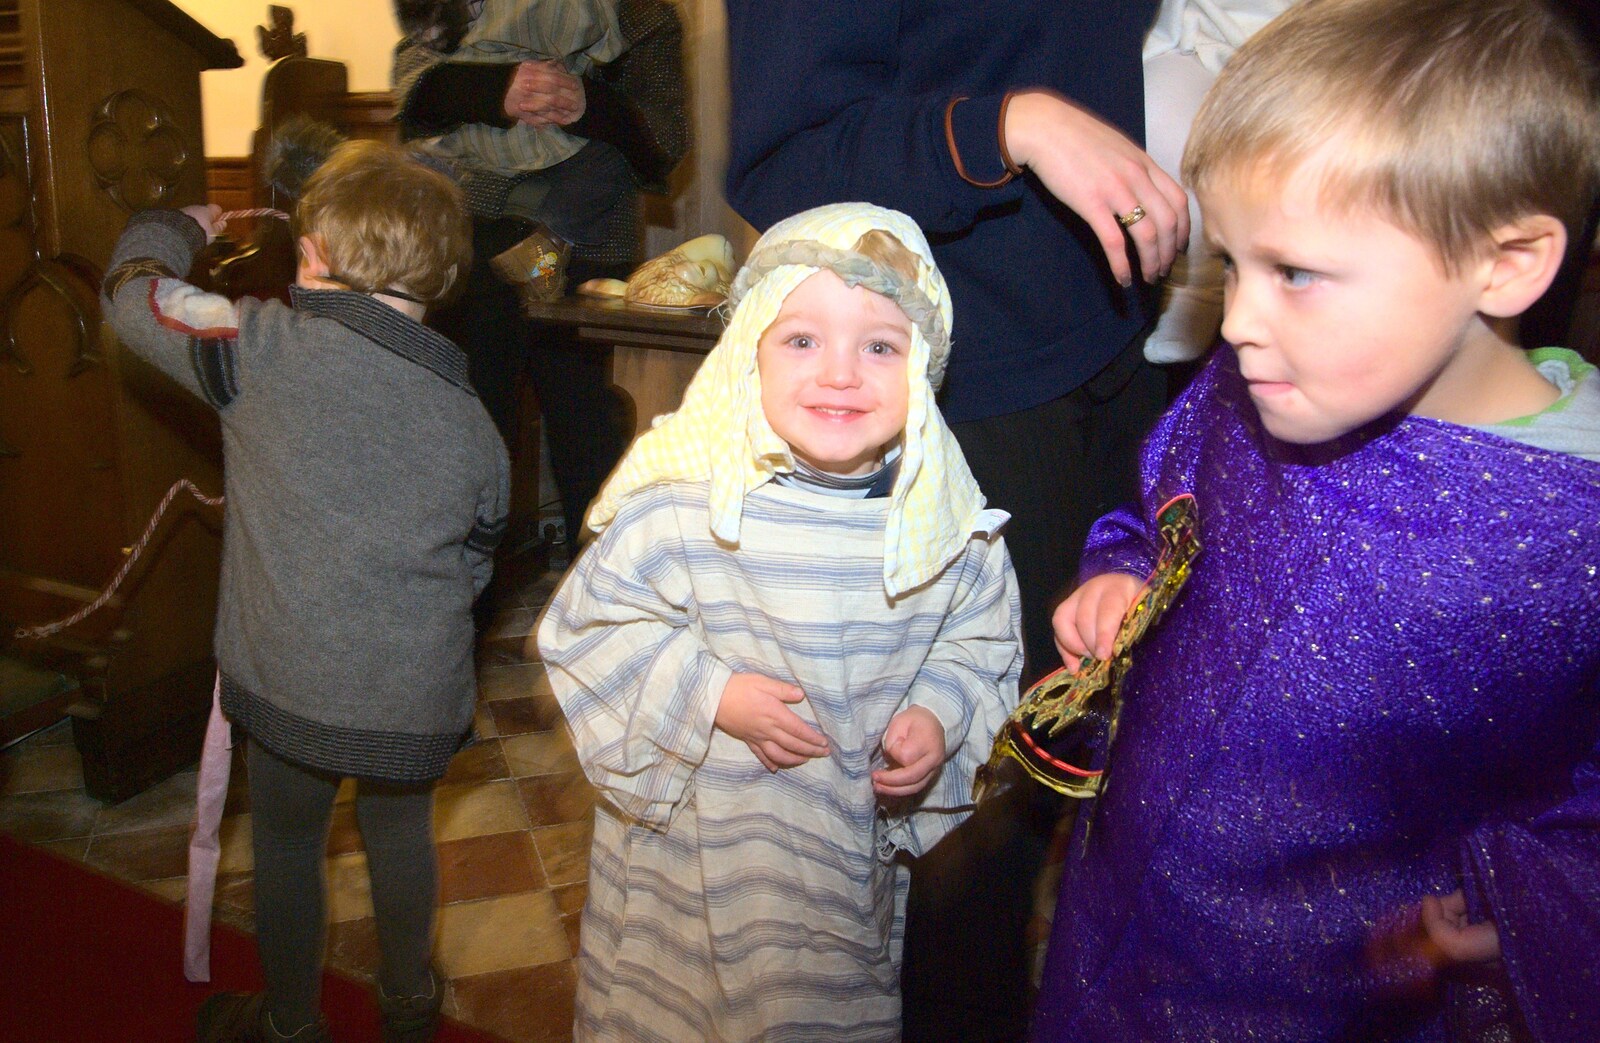 Fred in his towel from Fred's First Nativity, St. Peter's Church, Palgrave, Suffolk - 8th December 2011